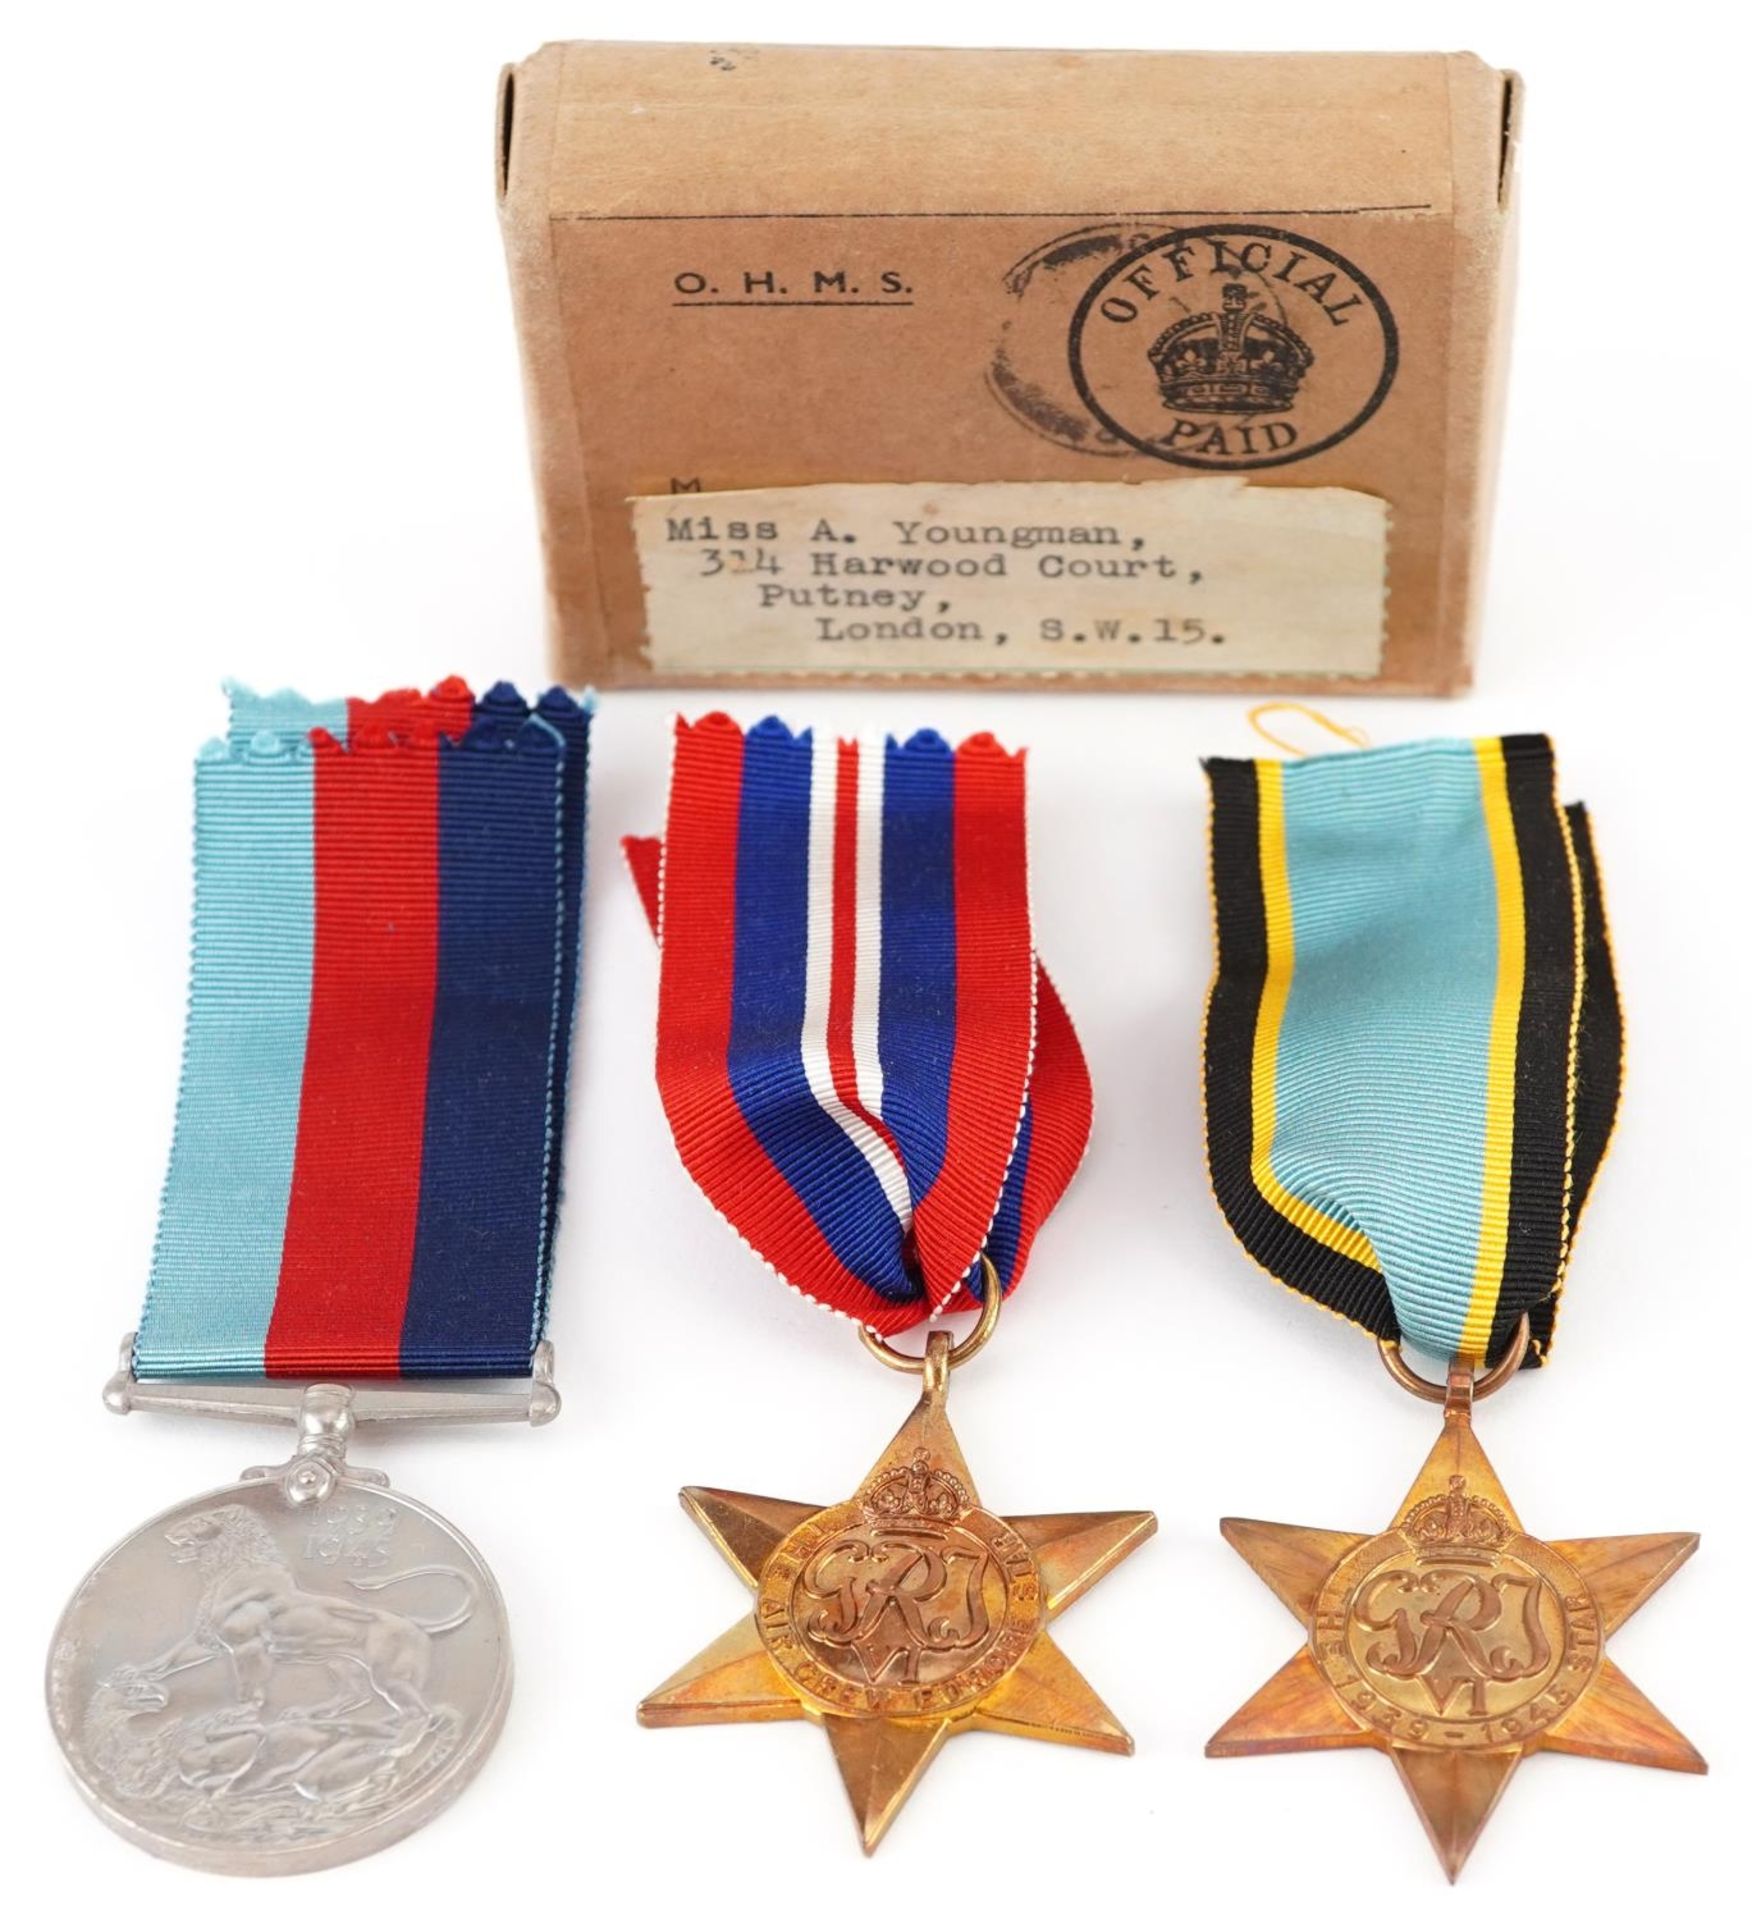 Three British military World War II medals with box of issue including Air Crew Europe star, the box